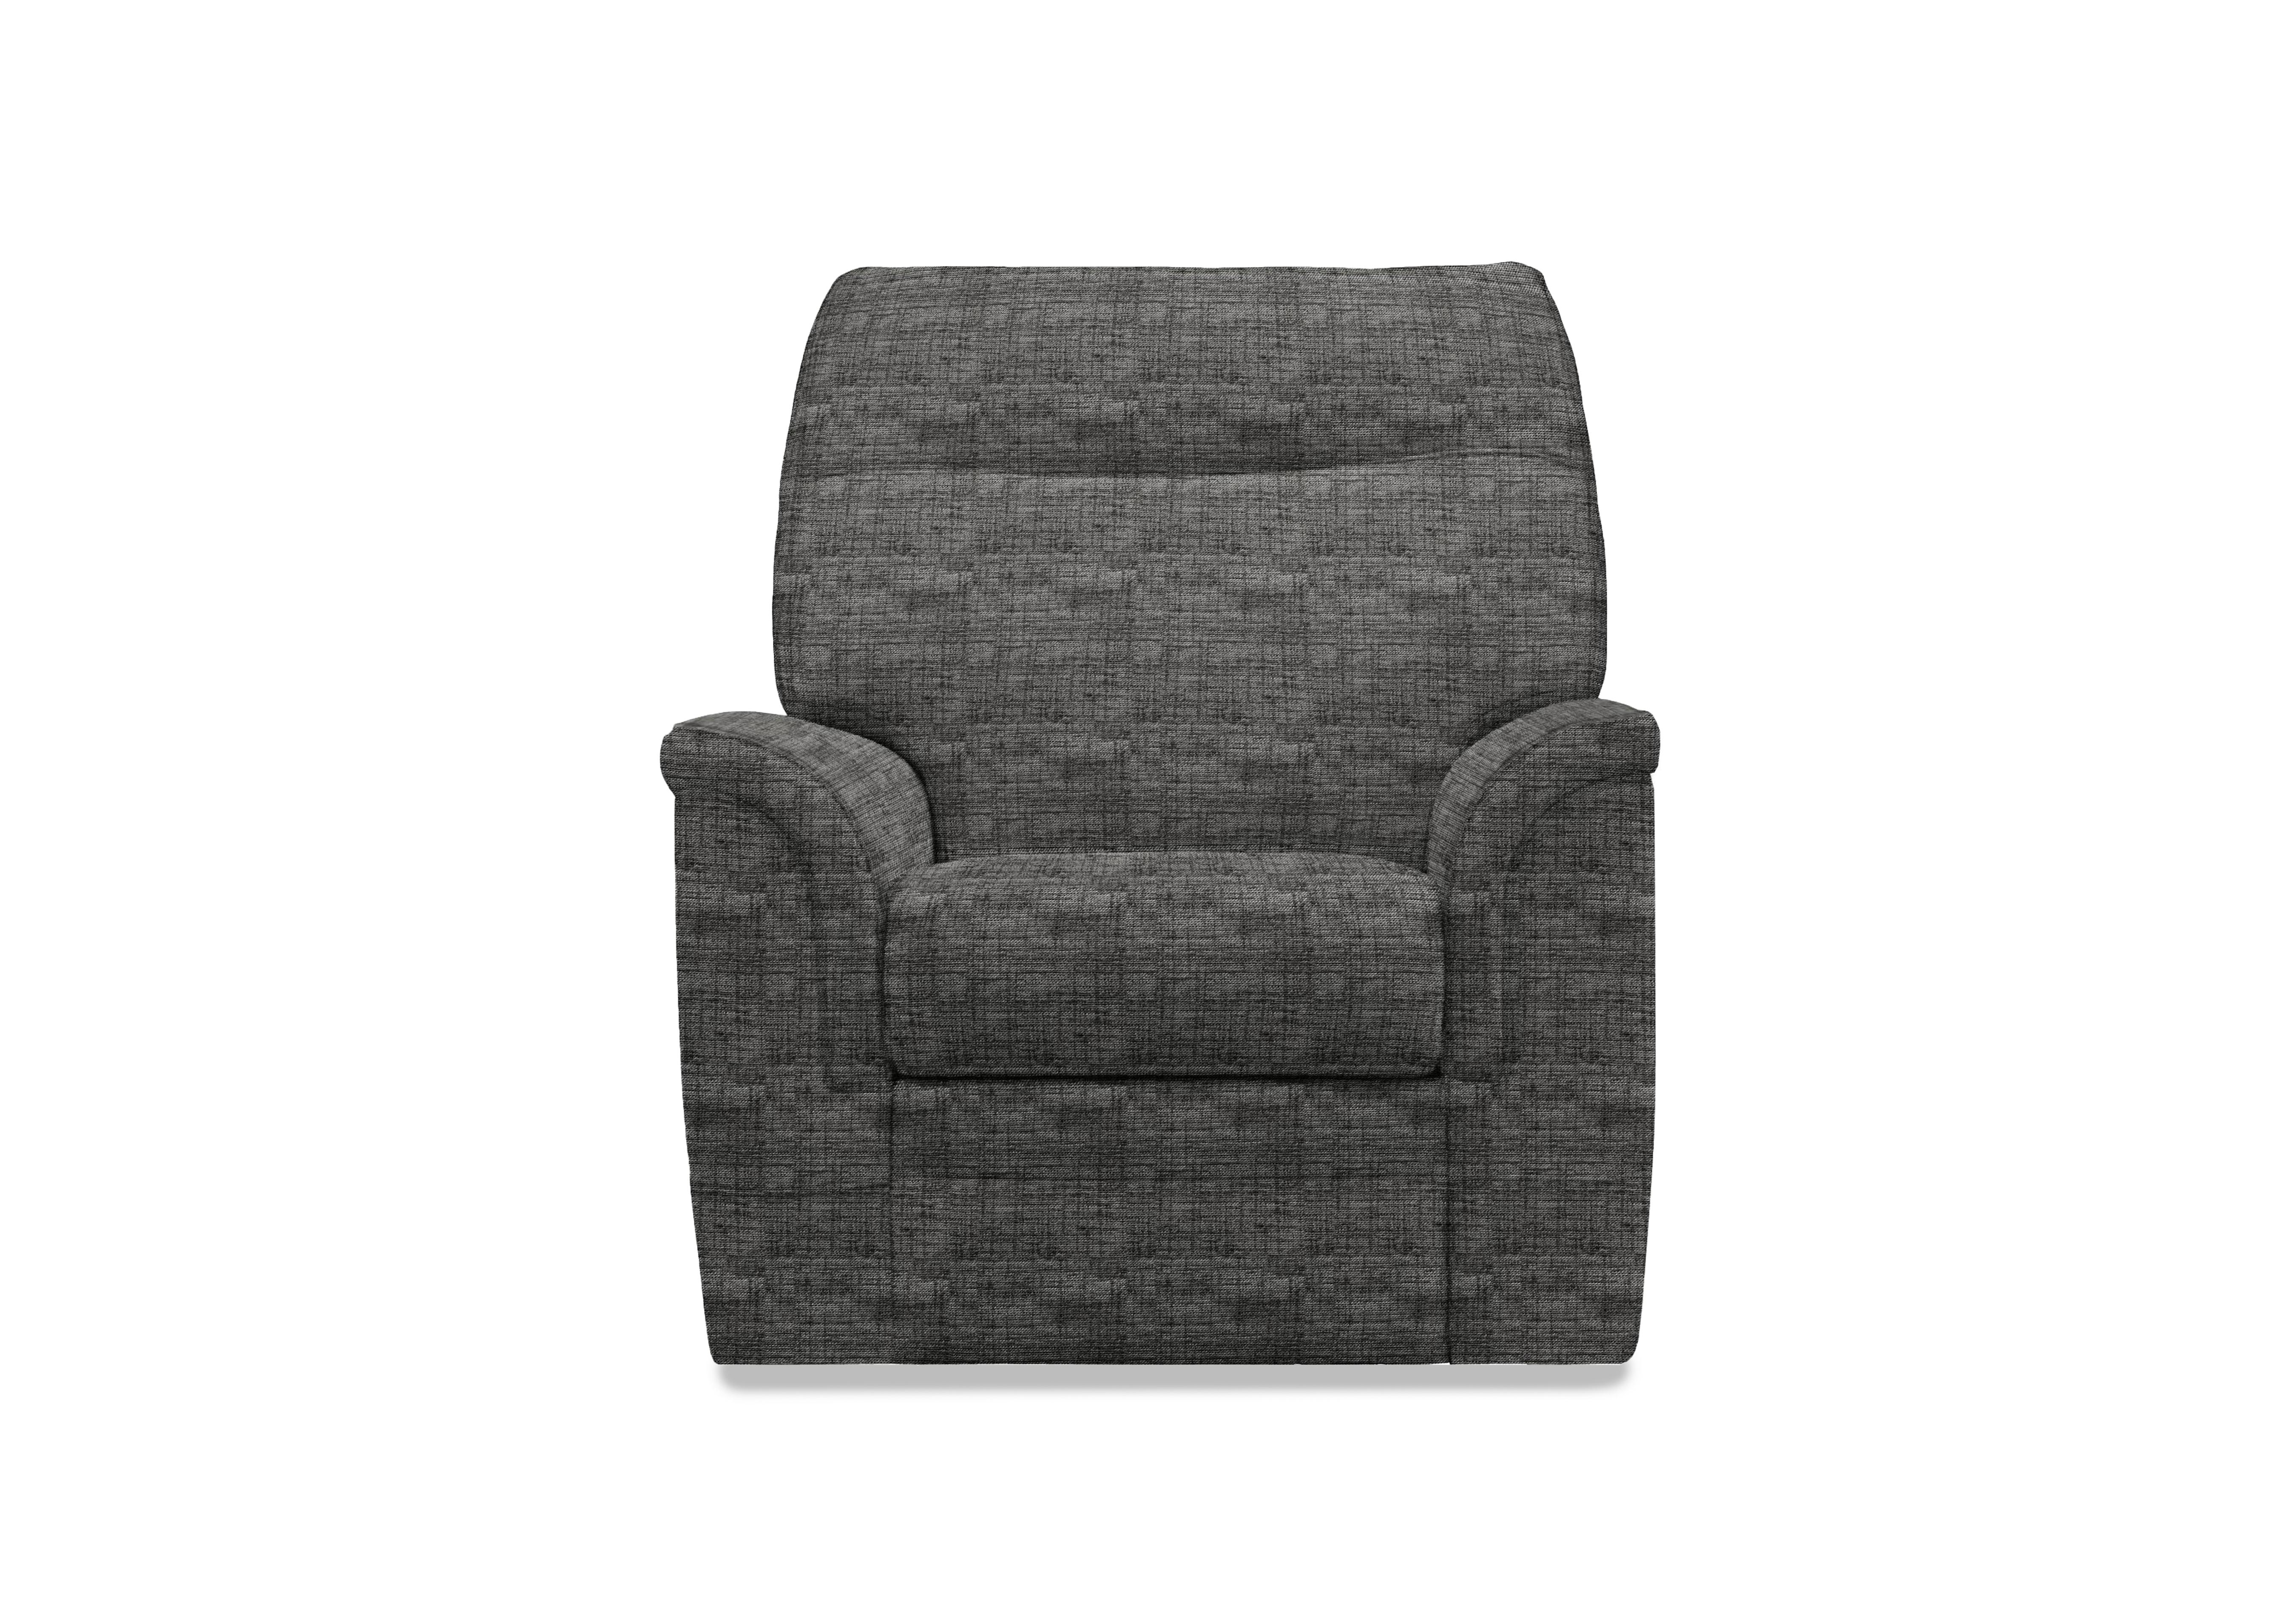 Hudson 23 Fabric Lift and Rise Chair in Dash Truffle 001497-0026 on Furniture Village